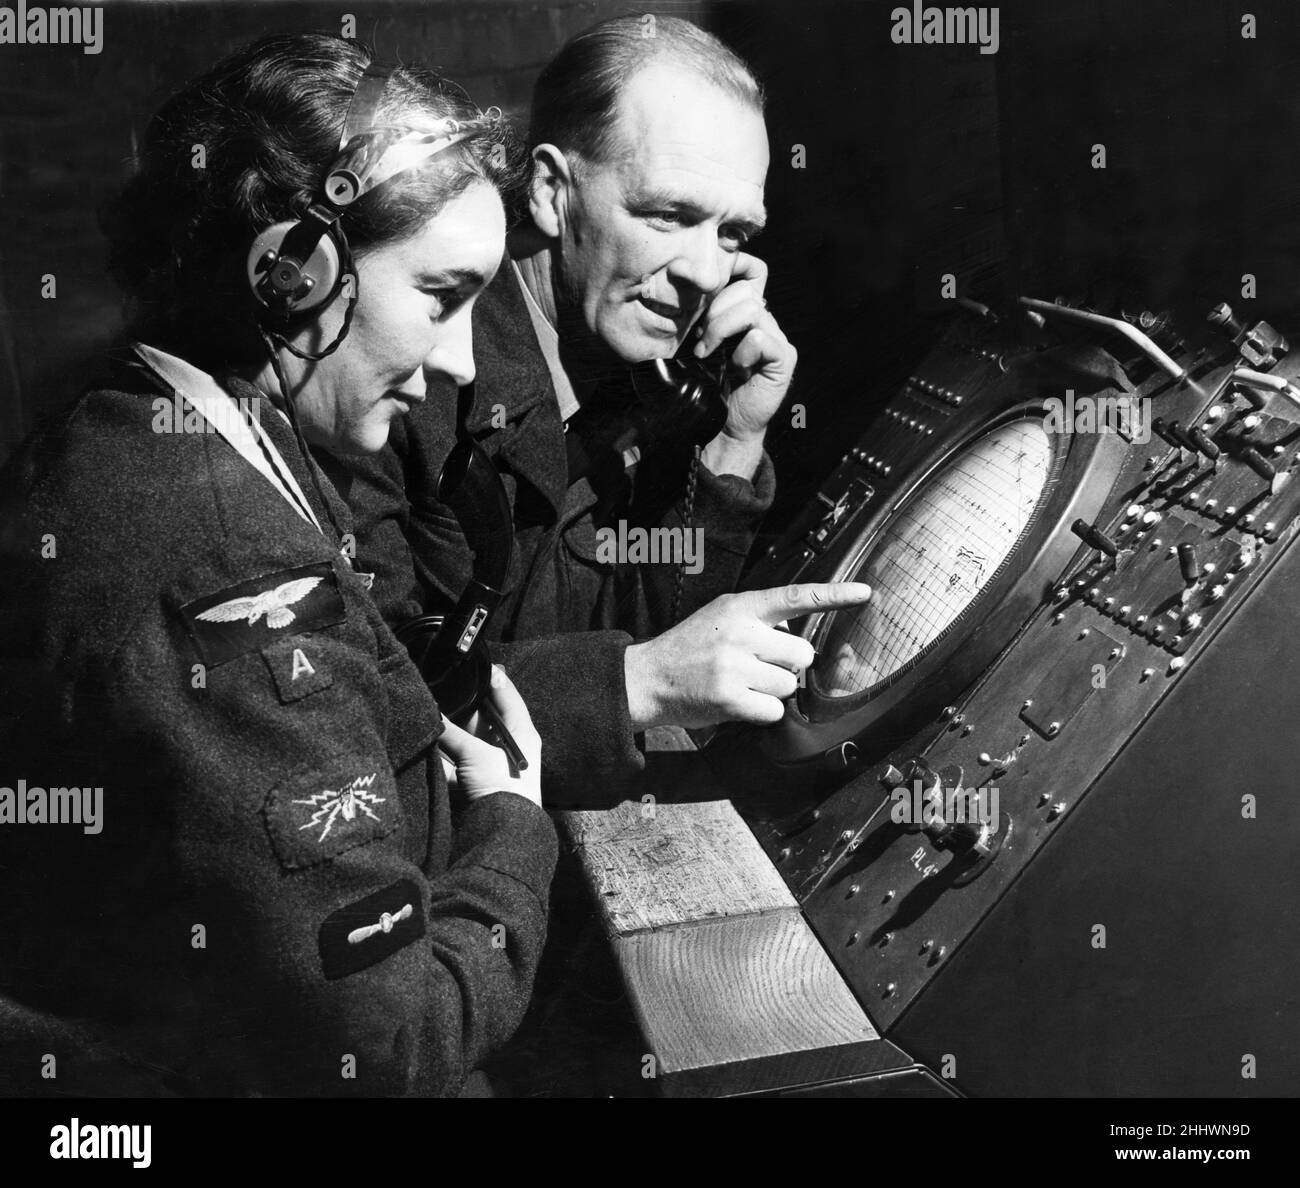 Royal Auxiliary Air Force Flying officer Eric Lloyd of Eccleston and LACW Peggy Hughes of Tottington, Bury keep track of an invader on  a radar screen at 3613 Fighter Control Unit at Bowlee.11th February 1955. Stock Photo